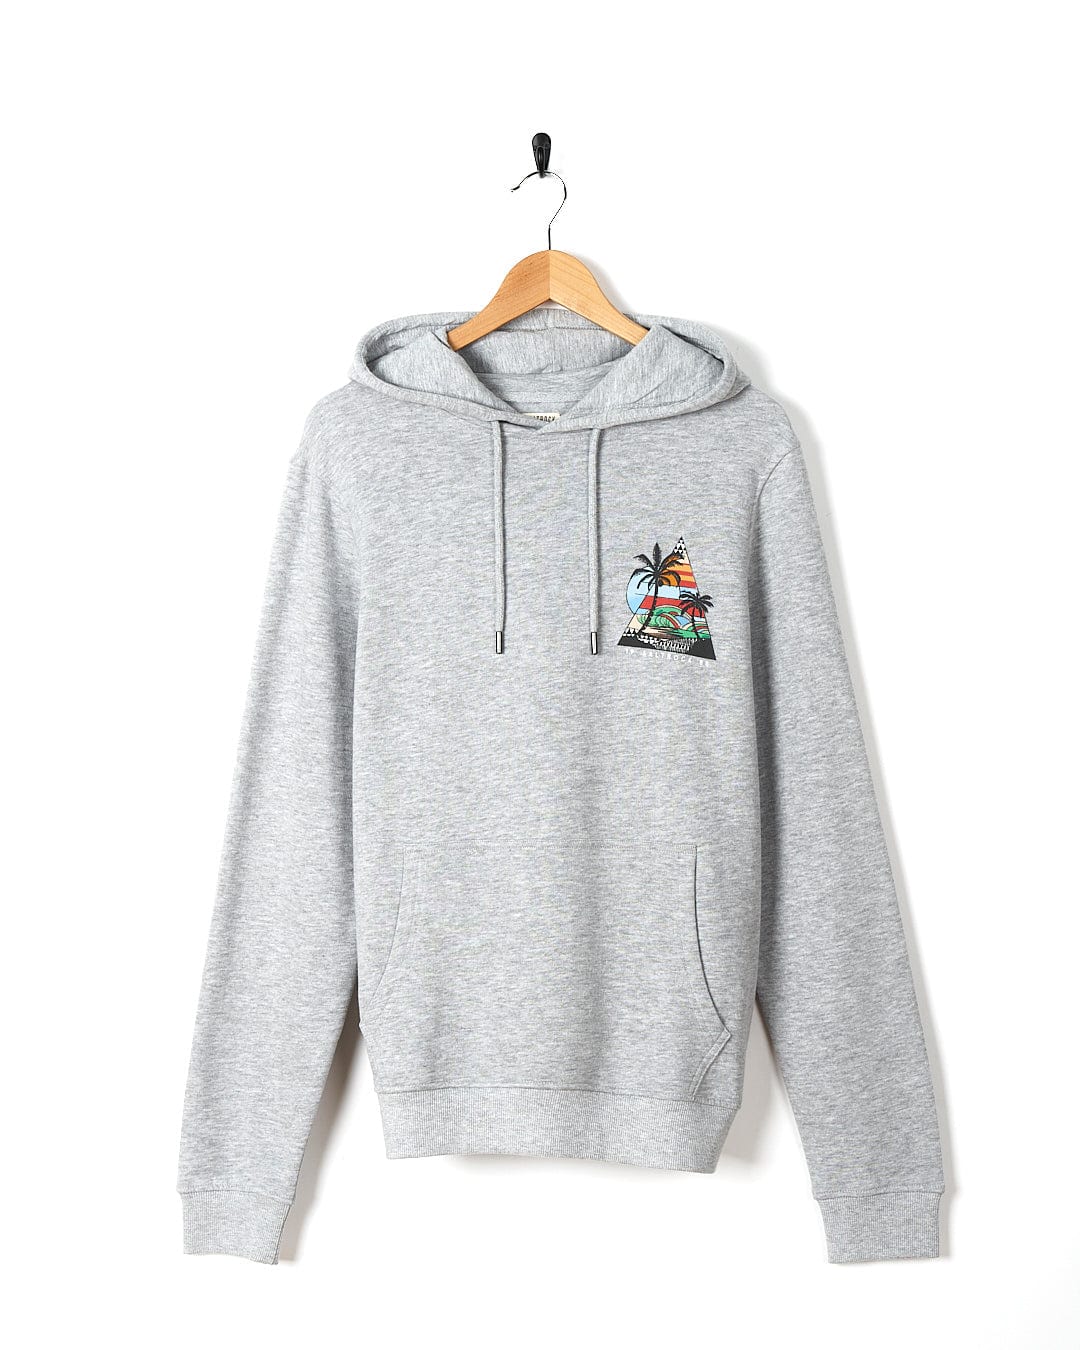 A Geo Beach - Mens Pop Hoodie - Grey with a palm tree embroidered on it by Saltrock.